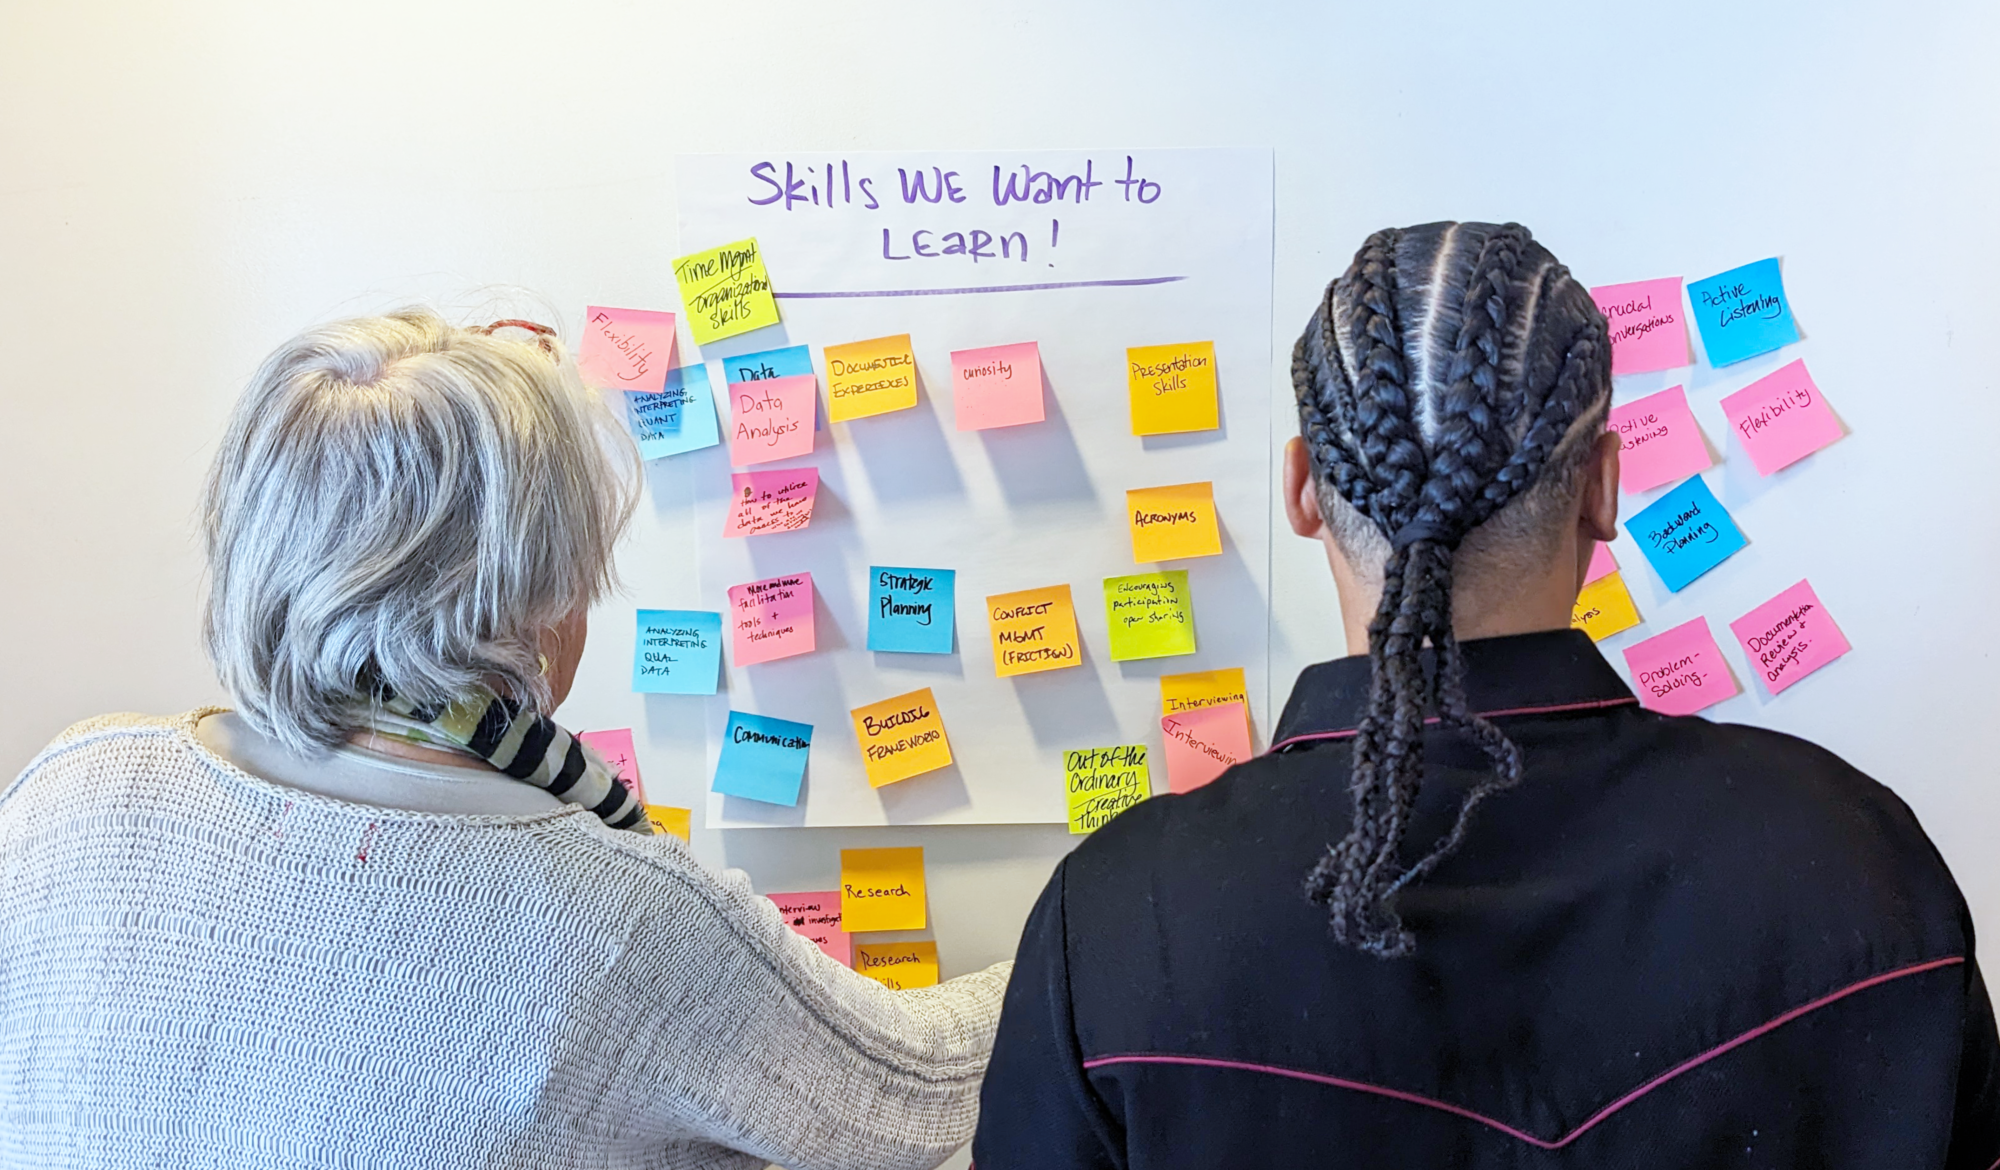 Virginia Hamilton and a kick-off participant are standing with their backs to camera, facing a wall of sticky notes that are labeled ‘skills we want to learn!’